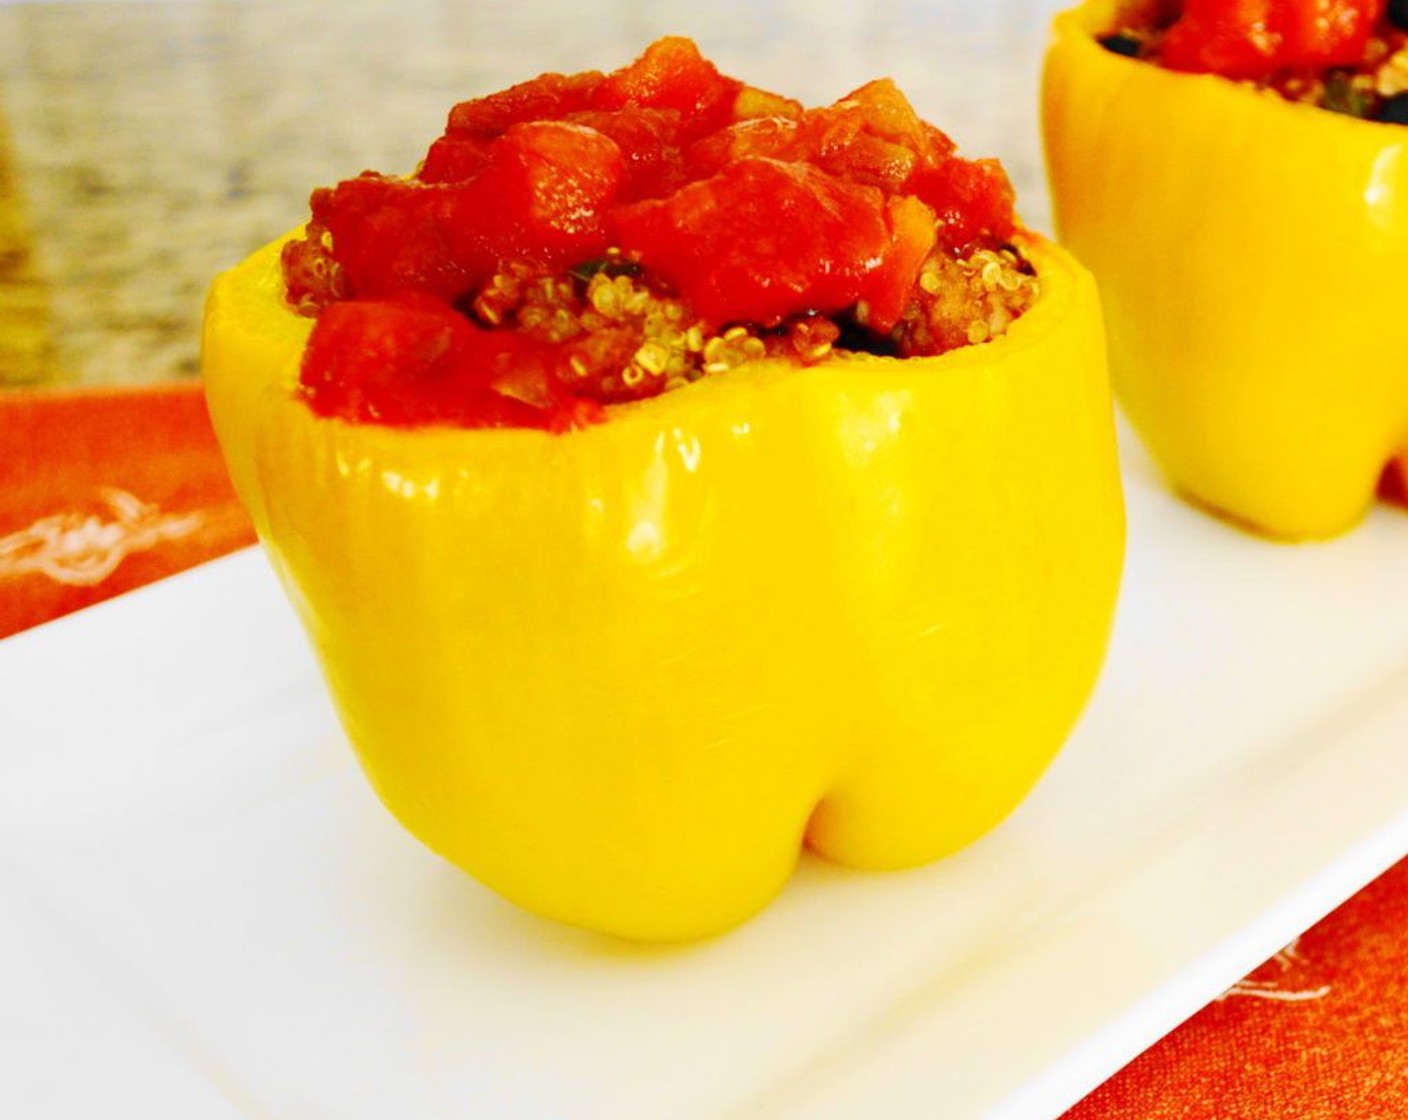 step 11 When they are done, let the stuffed peppers cool for a minute. Top each of them with Salsa (to taste) and serve immediately! Enjoy!